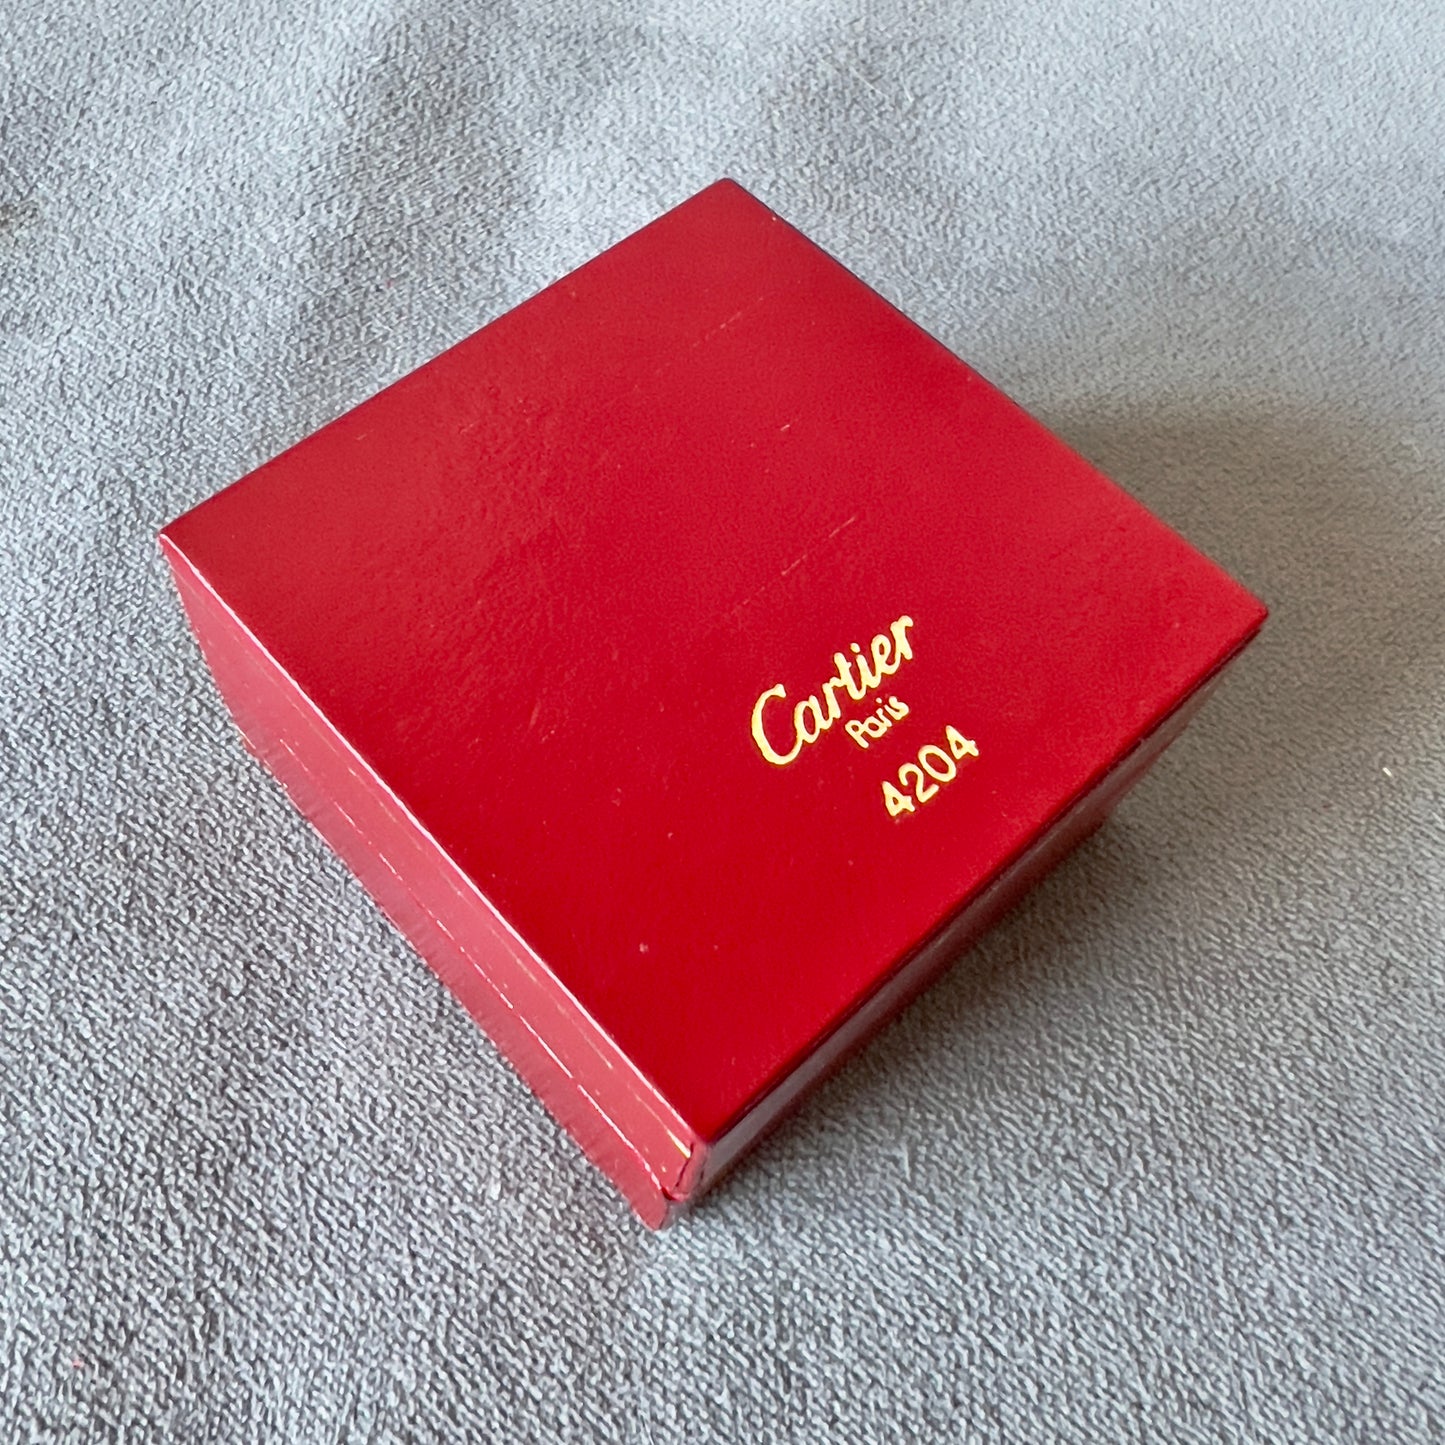 CARTIER Ring Box 2x2x1.10 inches